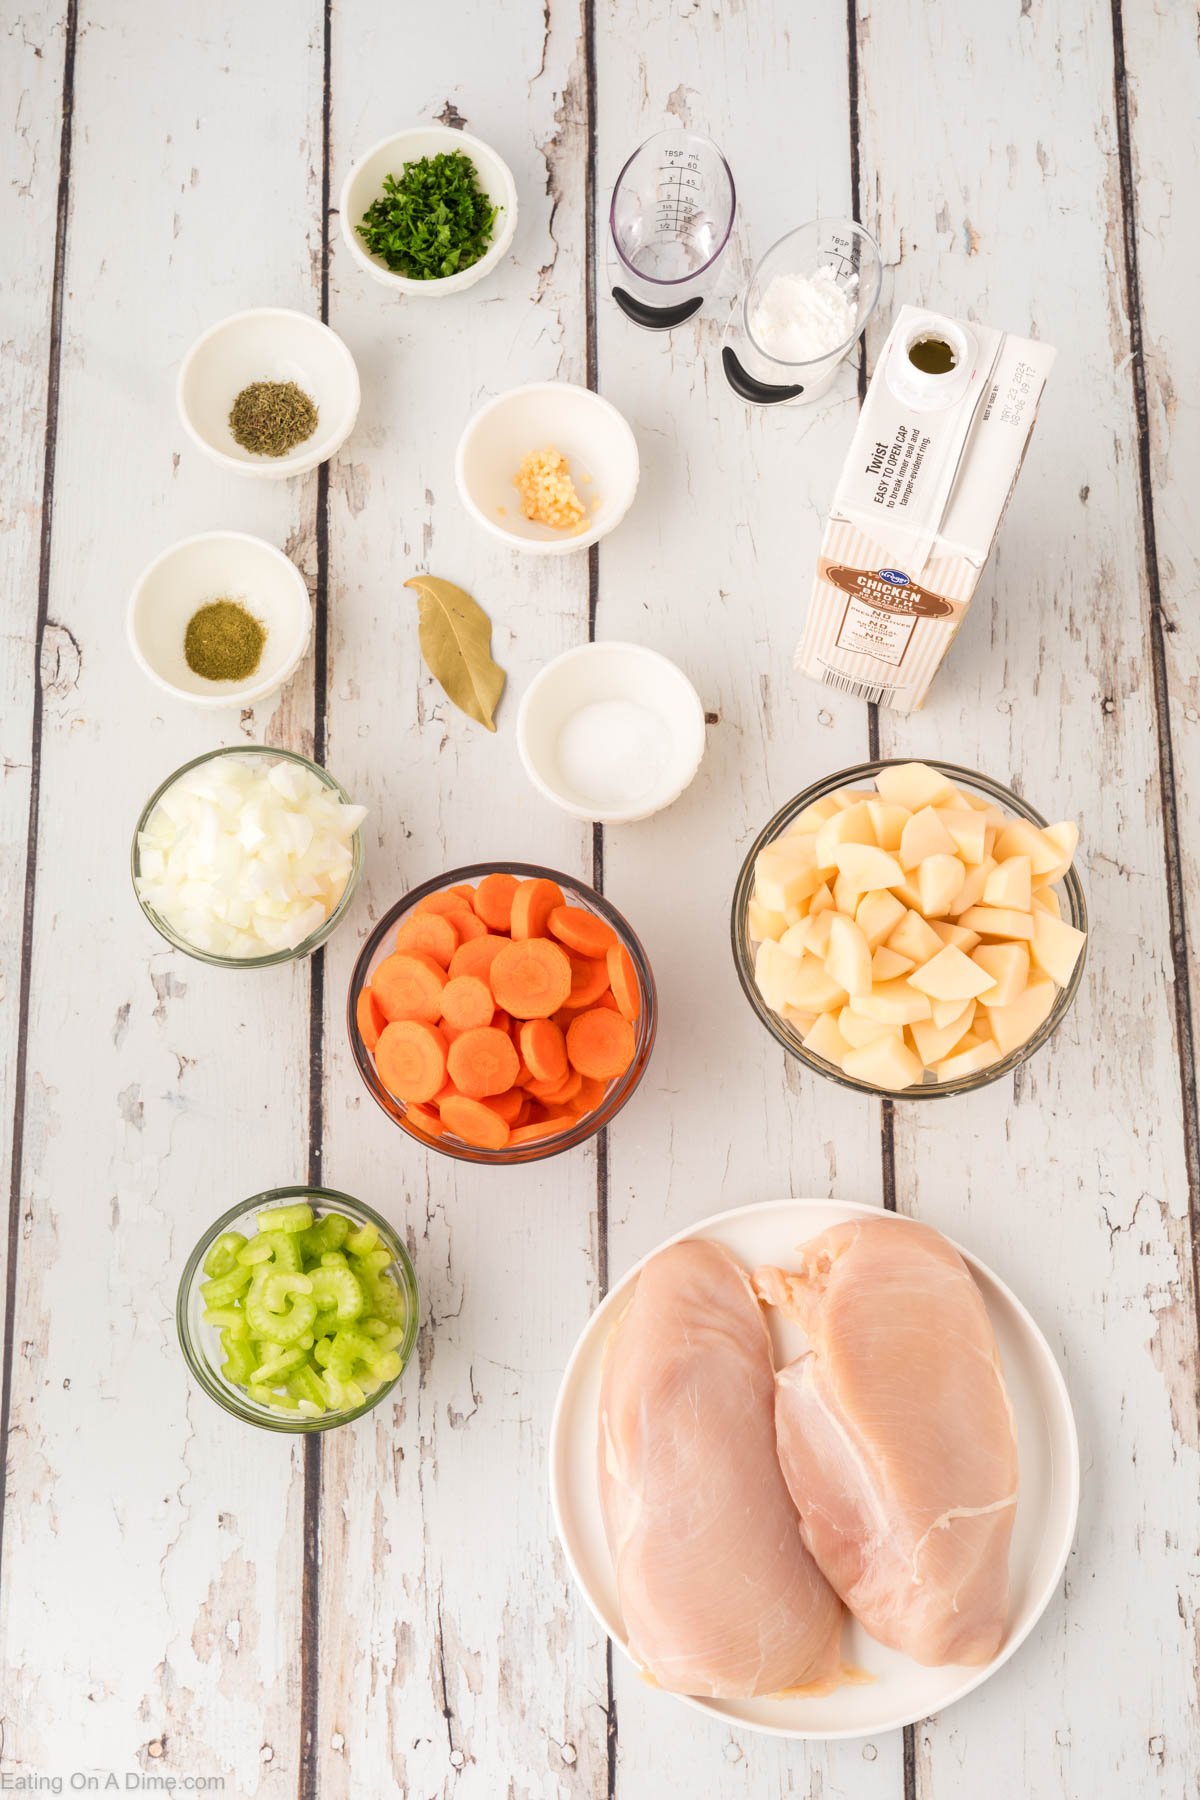 Ingredients needed for Chicken Stew - onion, celery, carrots, potatoes, bay leaf, salt and pepper, garlic, thyme, poultry seasoning, chicken breasts, chicken broth, corn starch, parsley